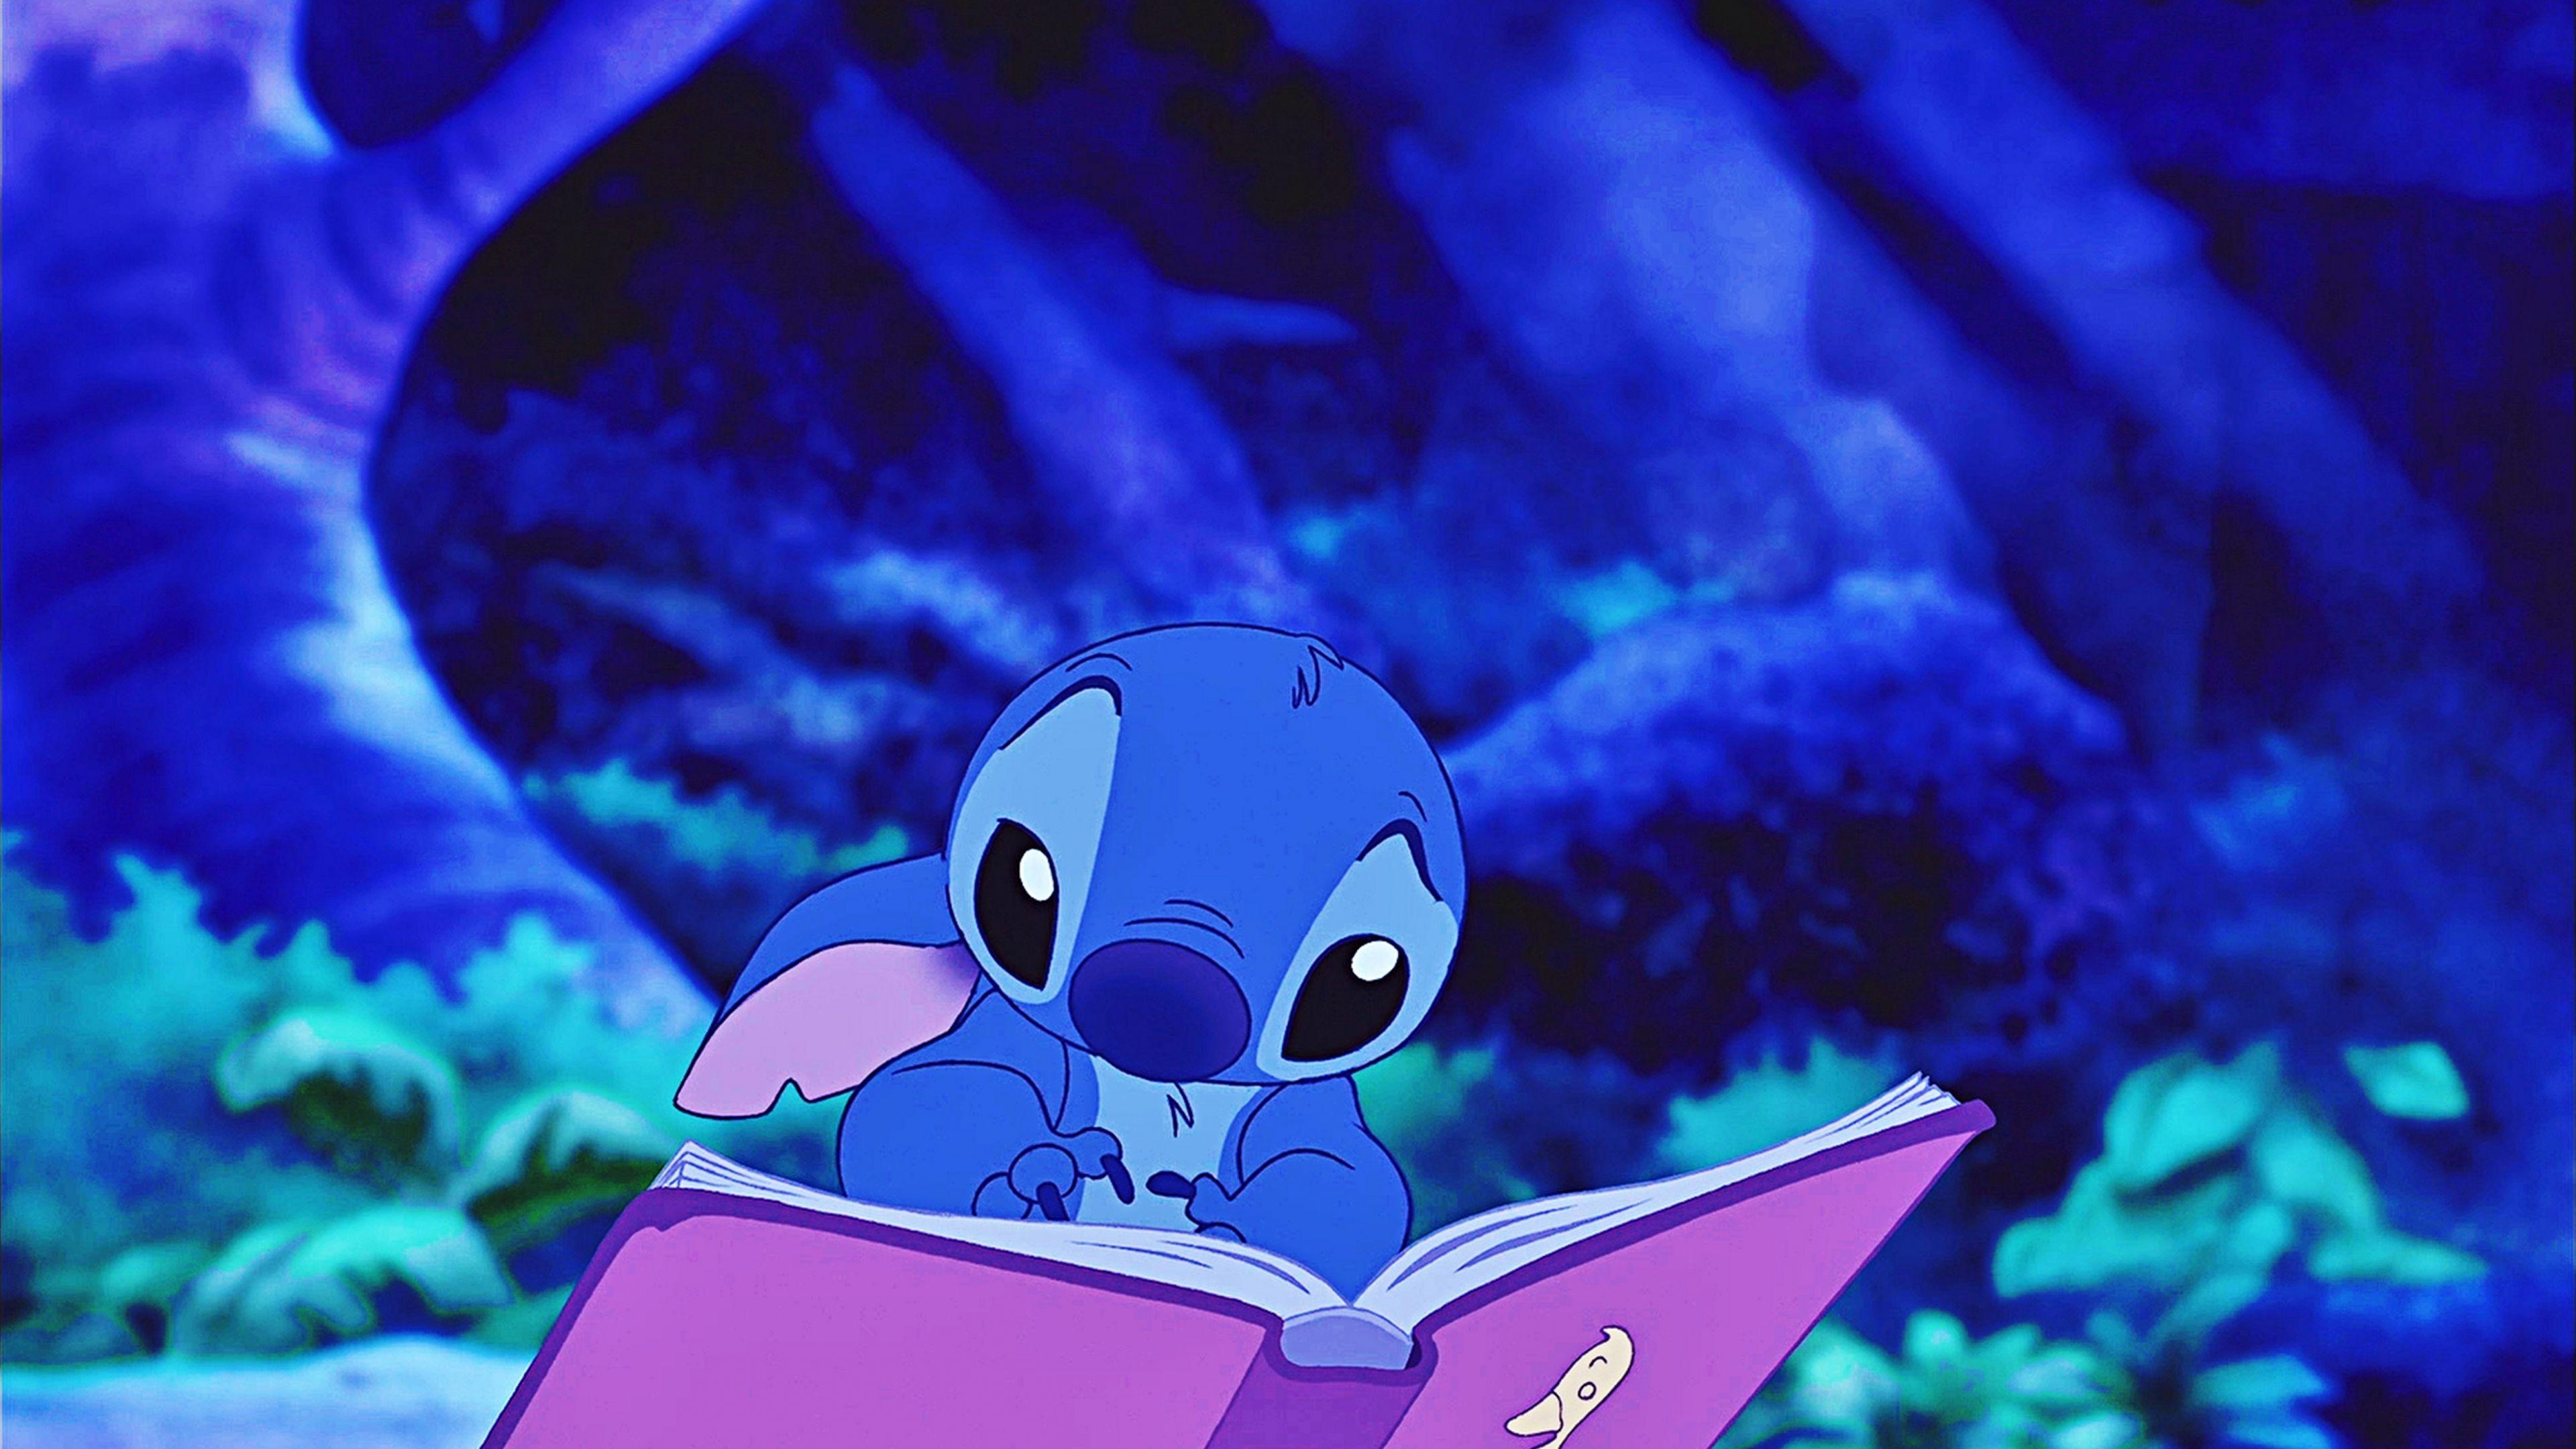 Stitch Laptop Wallpapers - Top Free Stitch Laptop Backgrounds ...